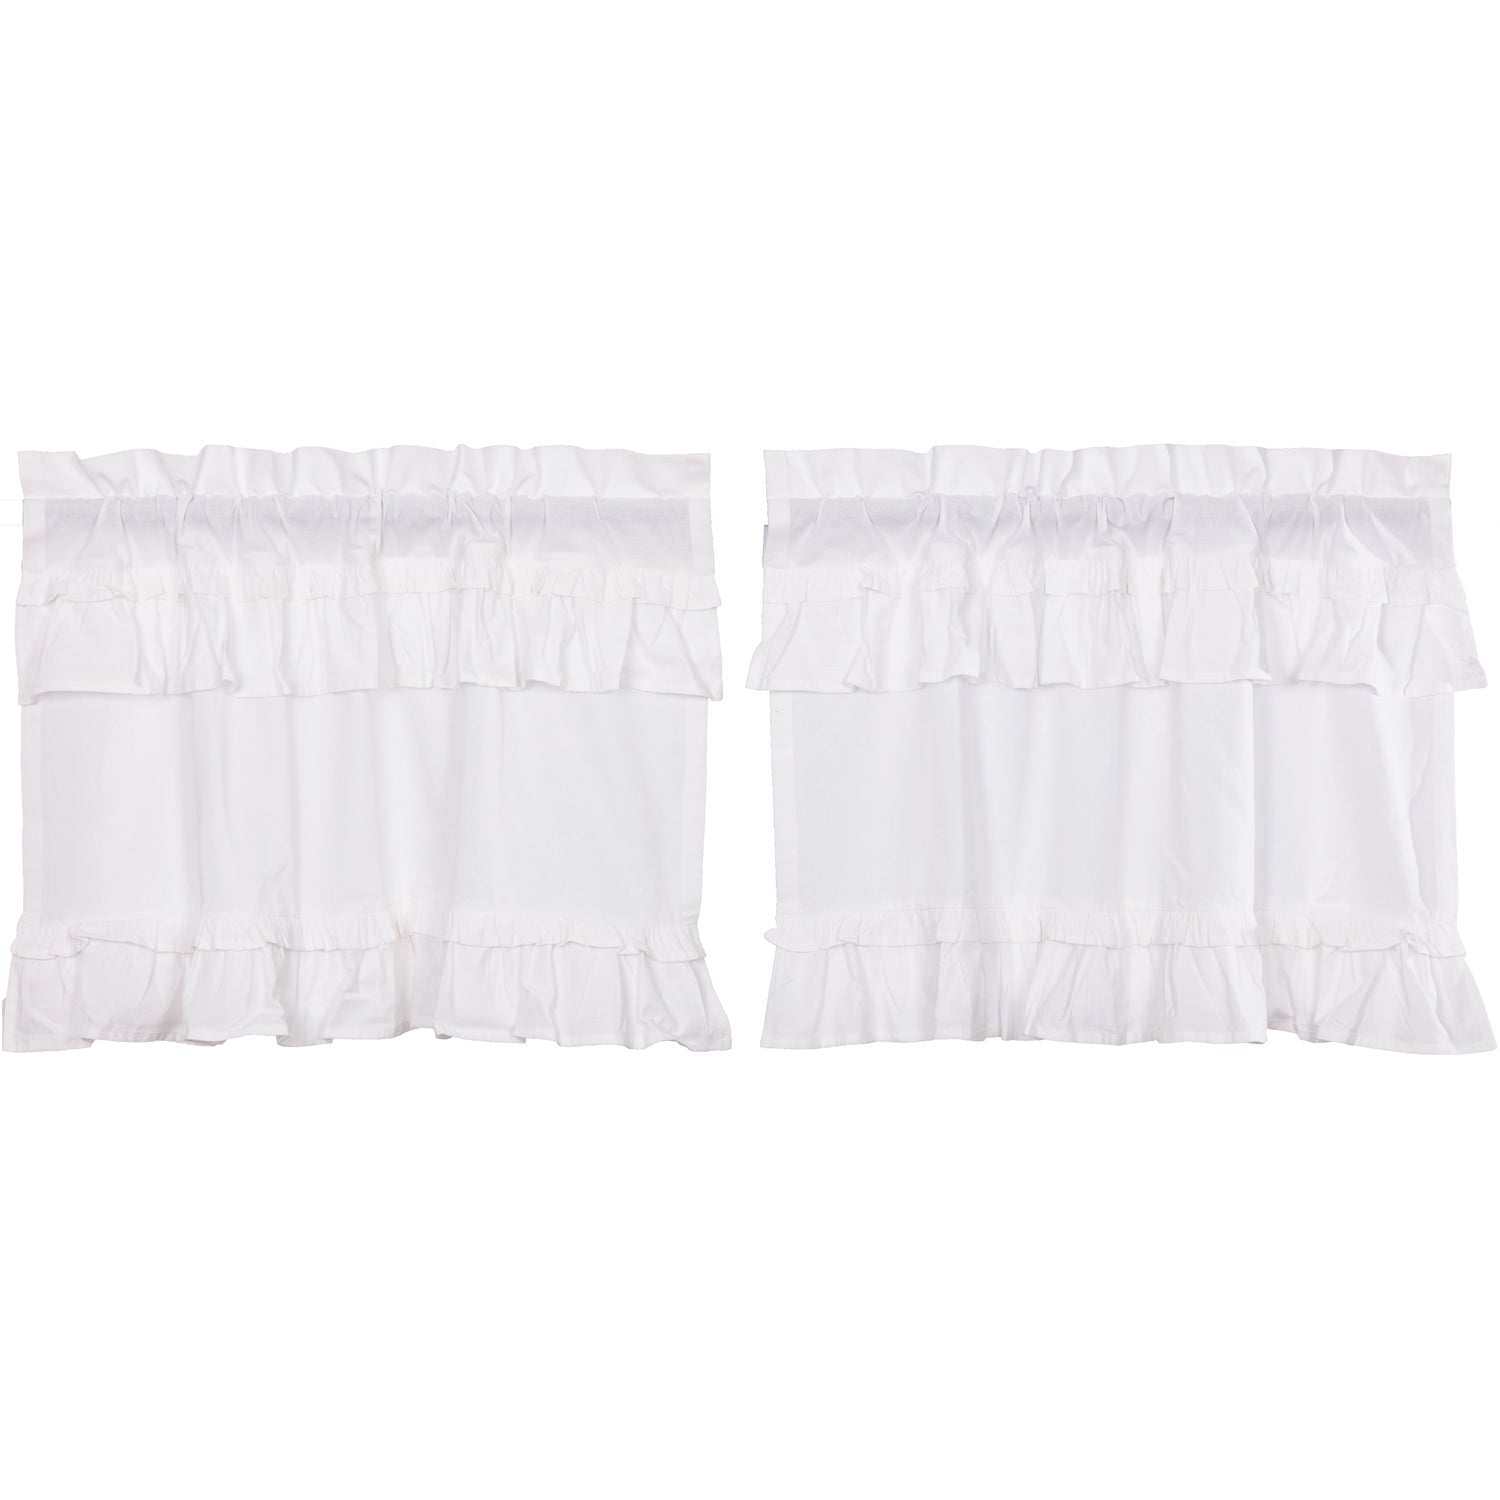 51993-Muslin-Ruffled-Bleached-White-Tier-Set-of-2-L24xW36-image-6